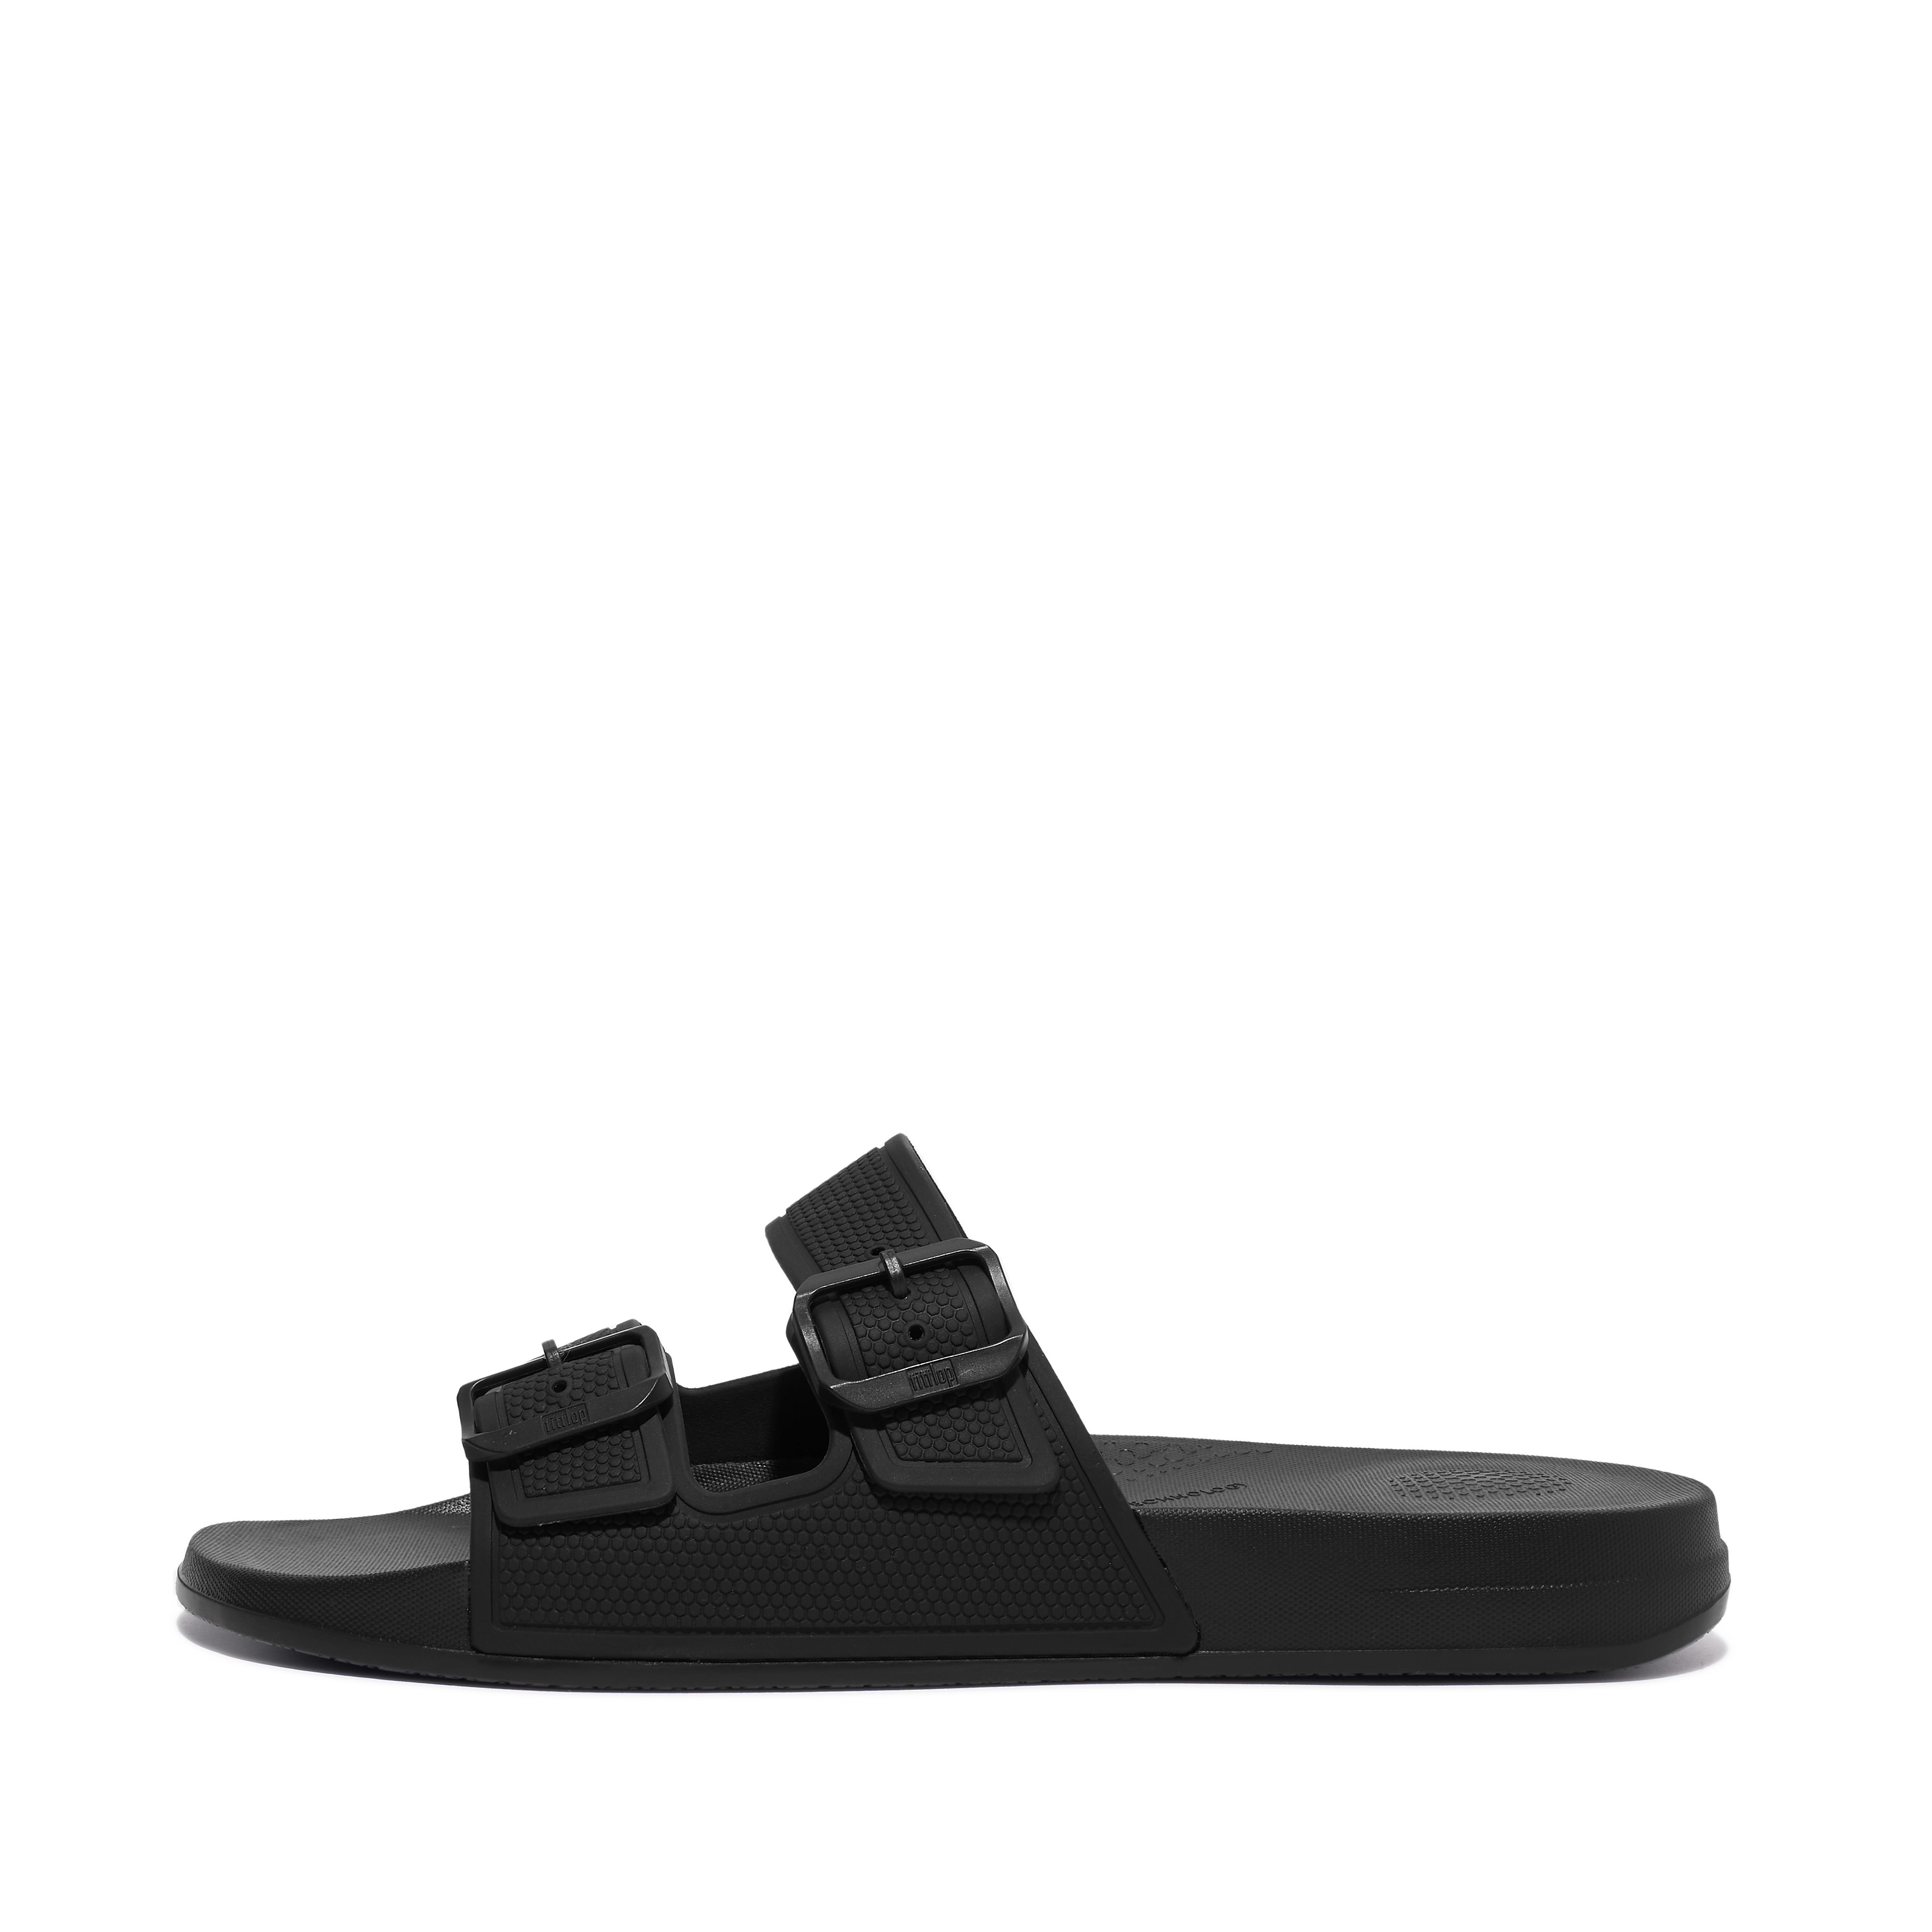 FitFlop iQUSHION